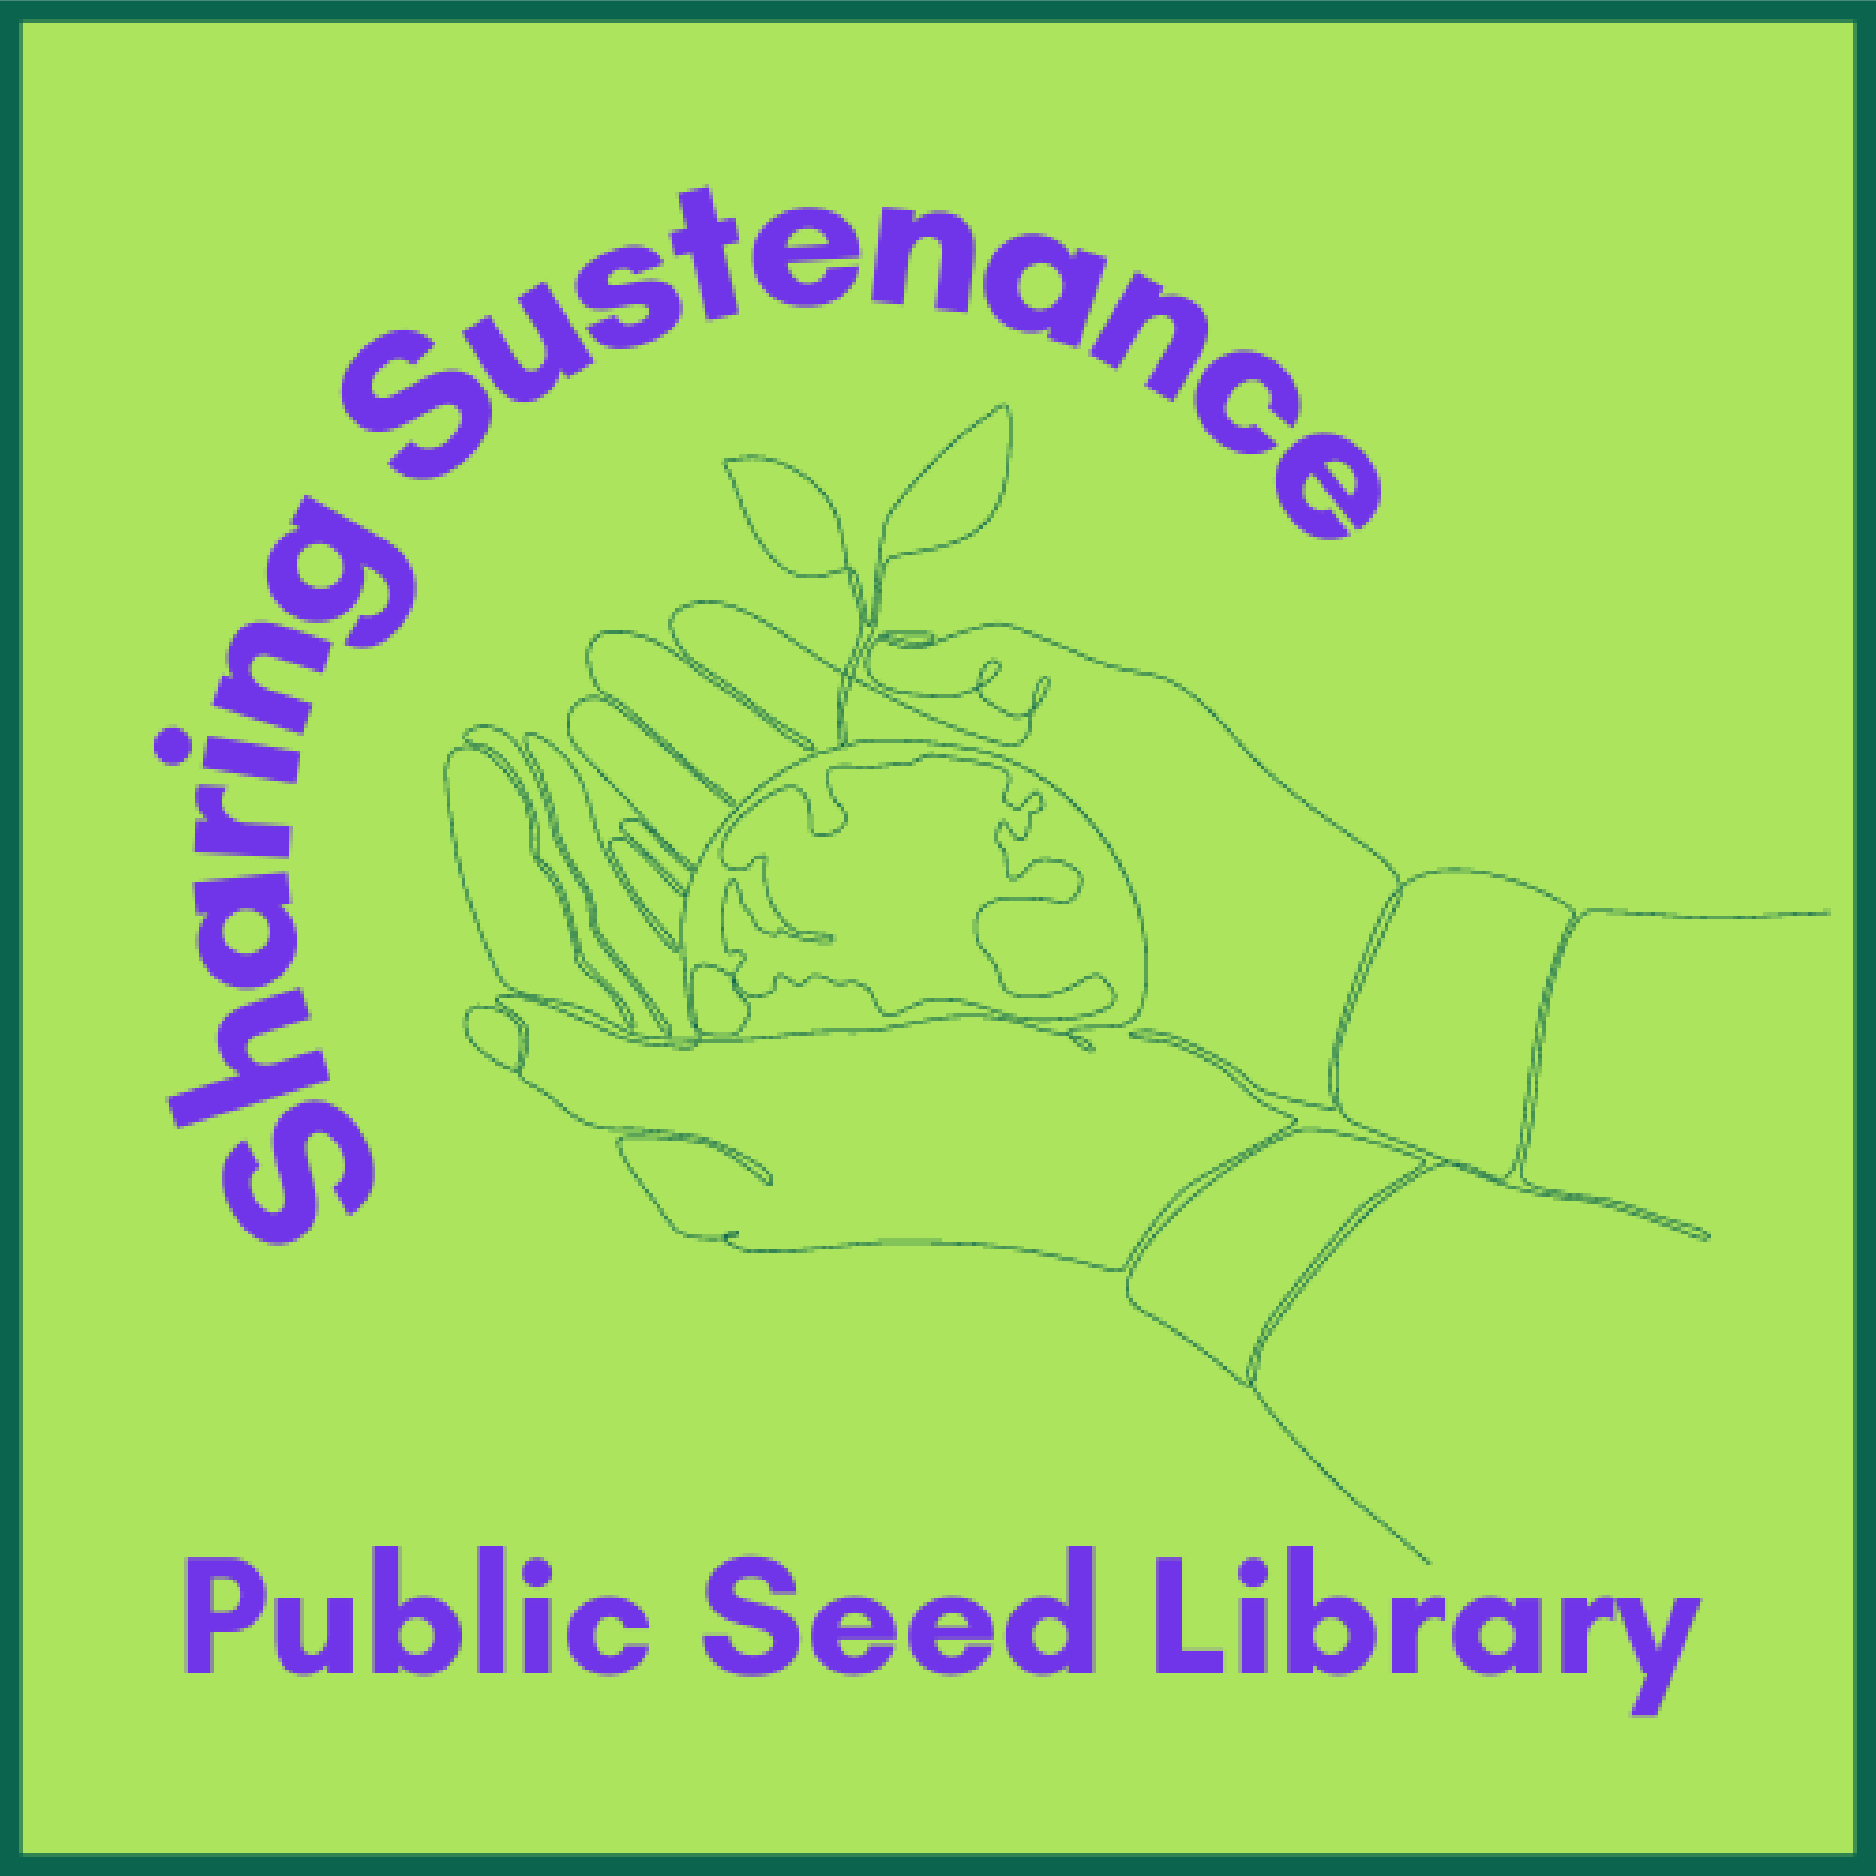 Public Seed Library - Sharing sustenance